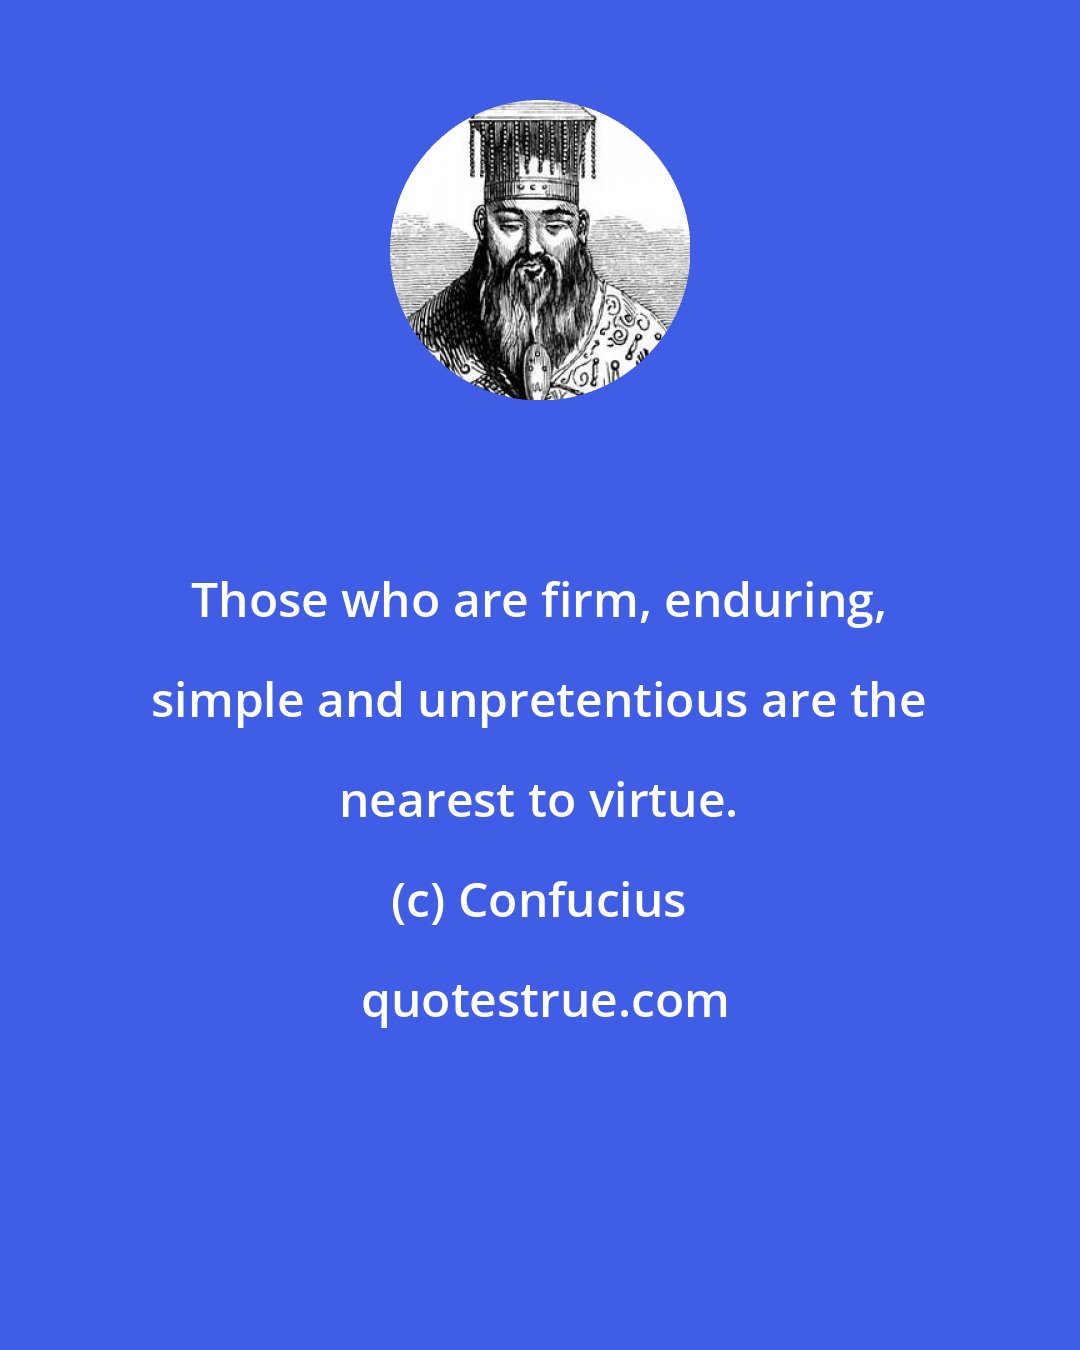 Confucius: Those who are firm, enduring, simple and unpretentious are the nearest to virtue.